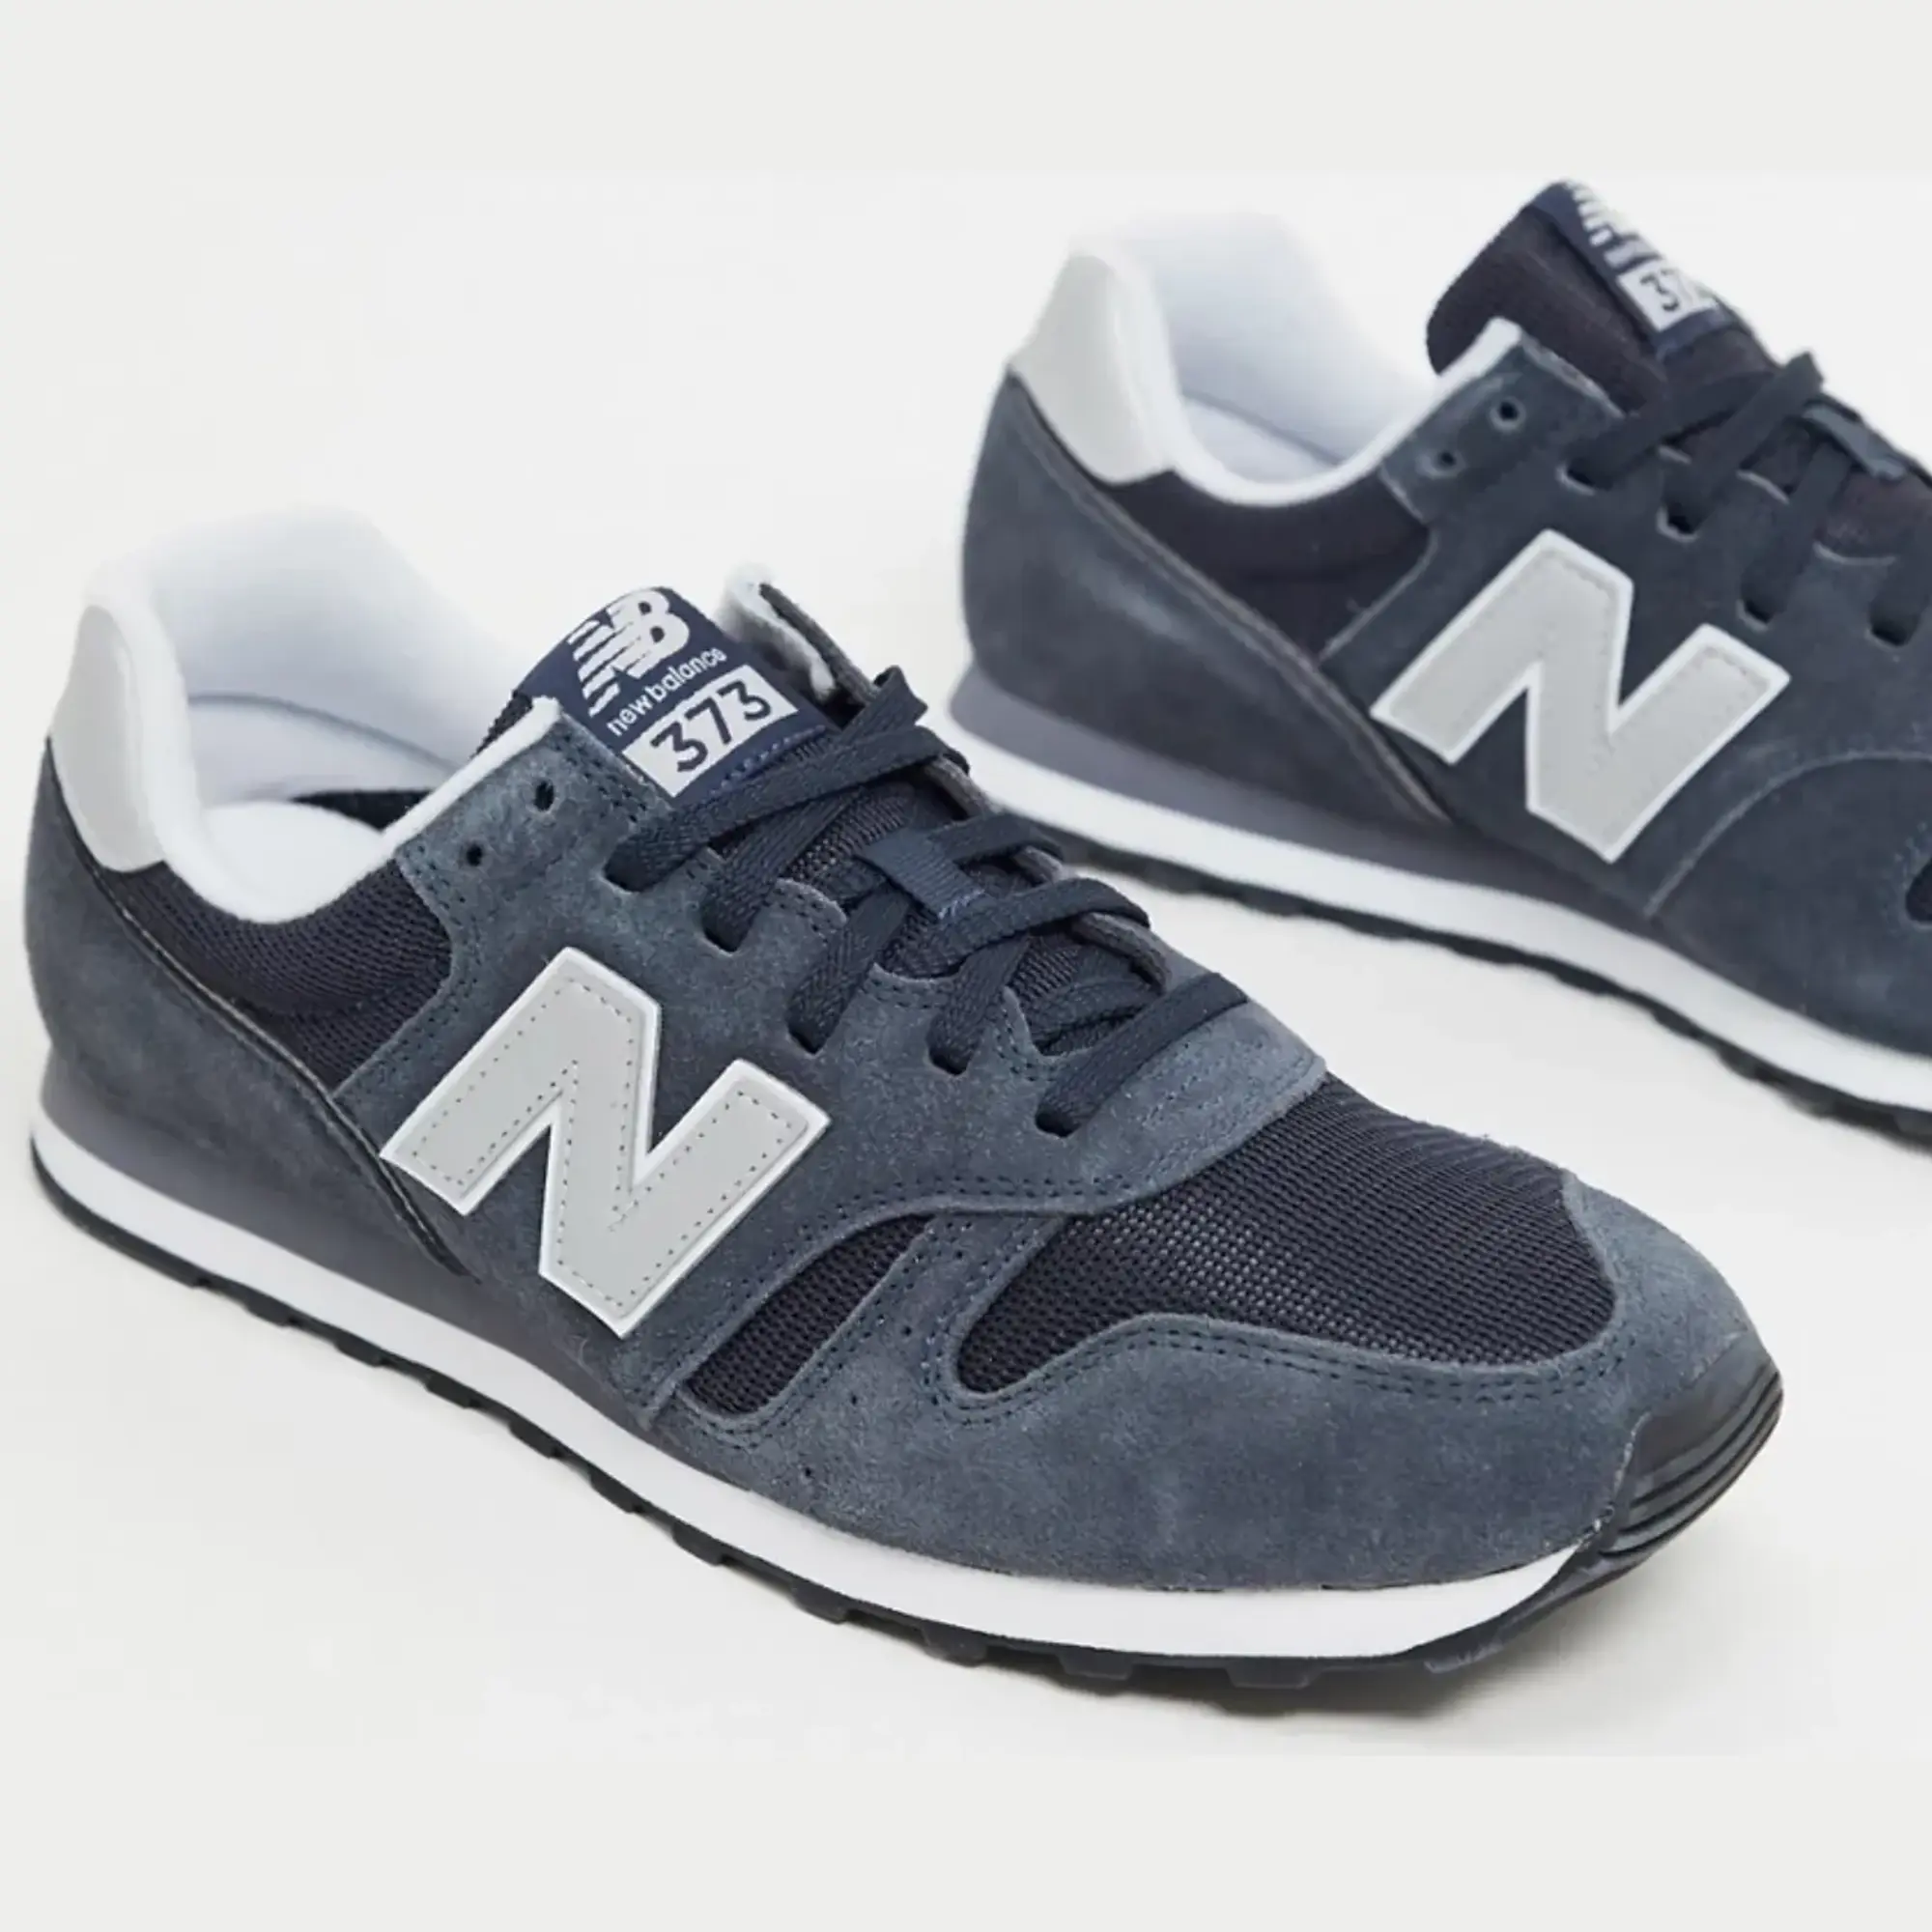 New Balance 373 Trainers In Navy And Grey